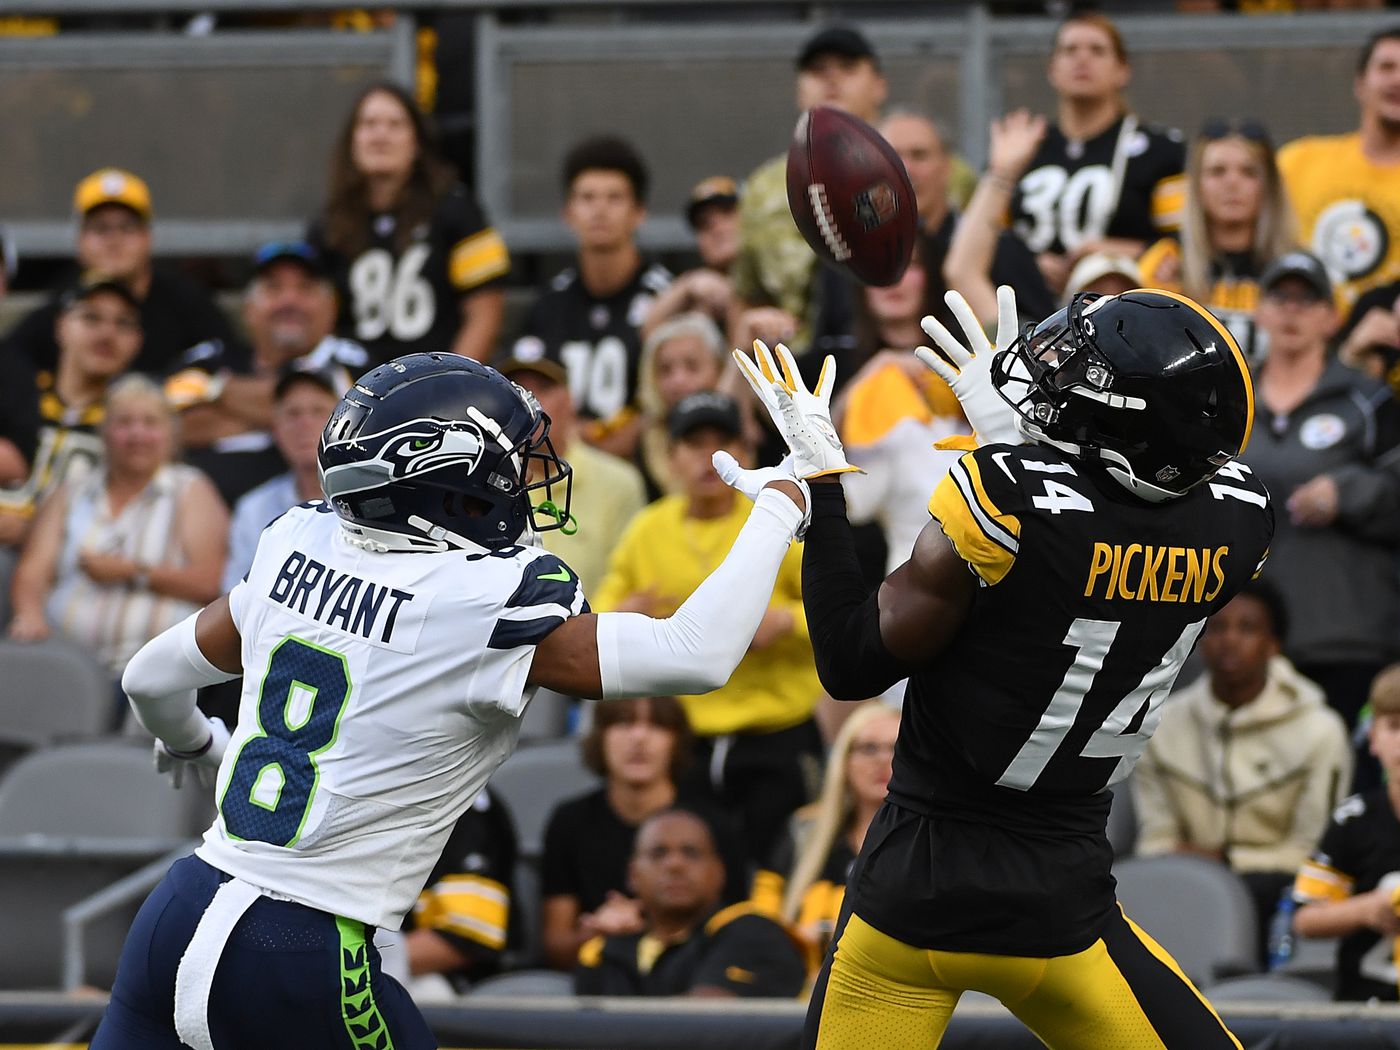 NFL News: Pittsburgh Steelers Search for New Star Receiver, Who Will Join George Pickens in Steelers’ Lineup?